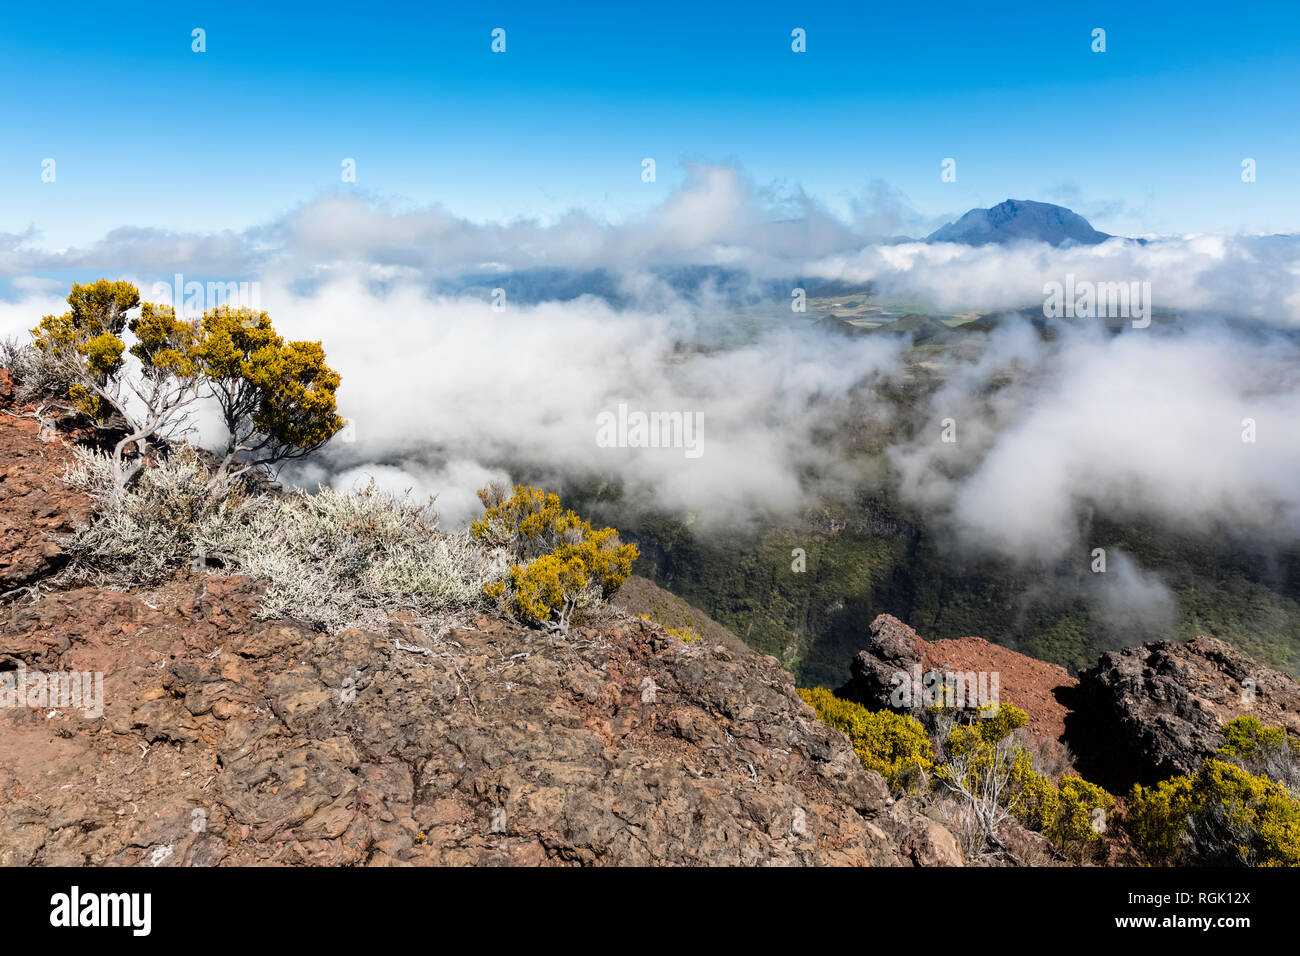 Reunion, Reunion National Park, Route forestiere du Volcan, View from Riviere des Remparts and Piton des Neiges Stock Photo